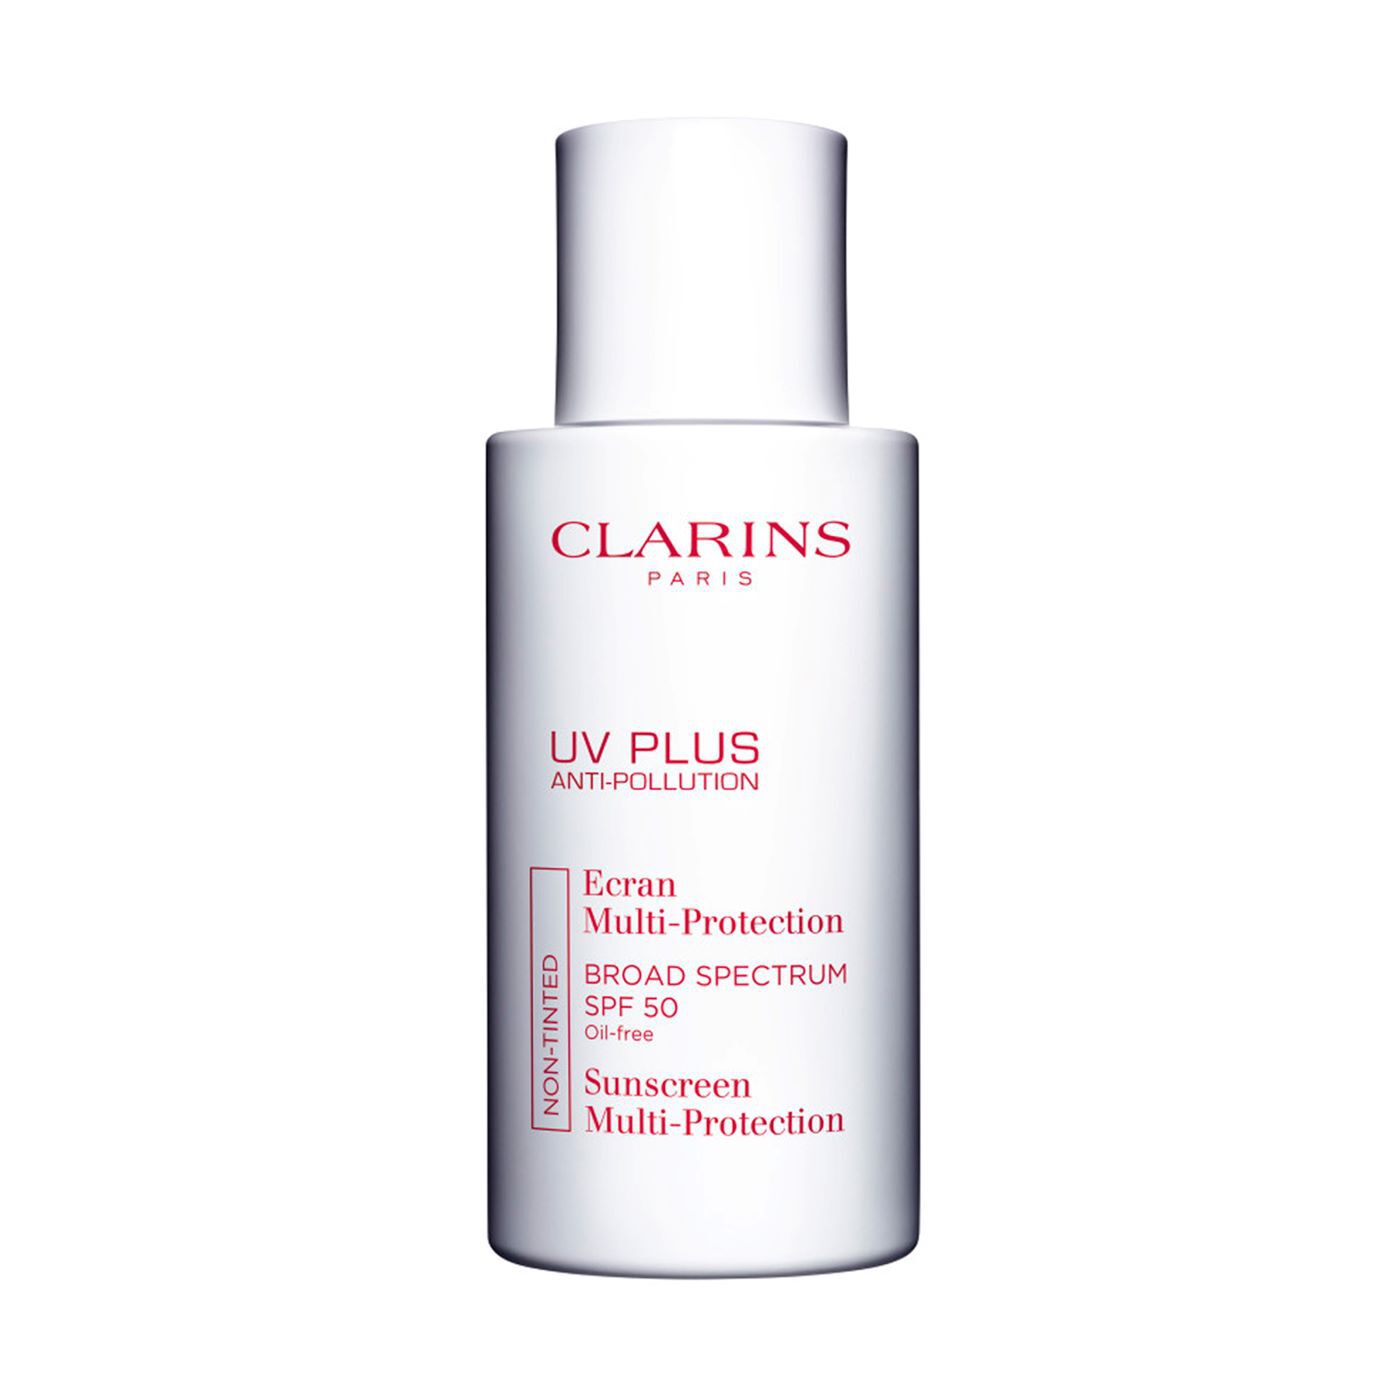 Facial Skincare Products for All Skin Types | Clarins Face Creams